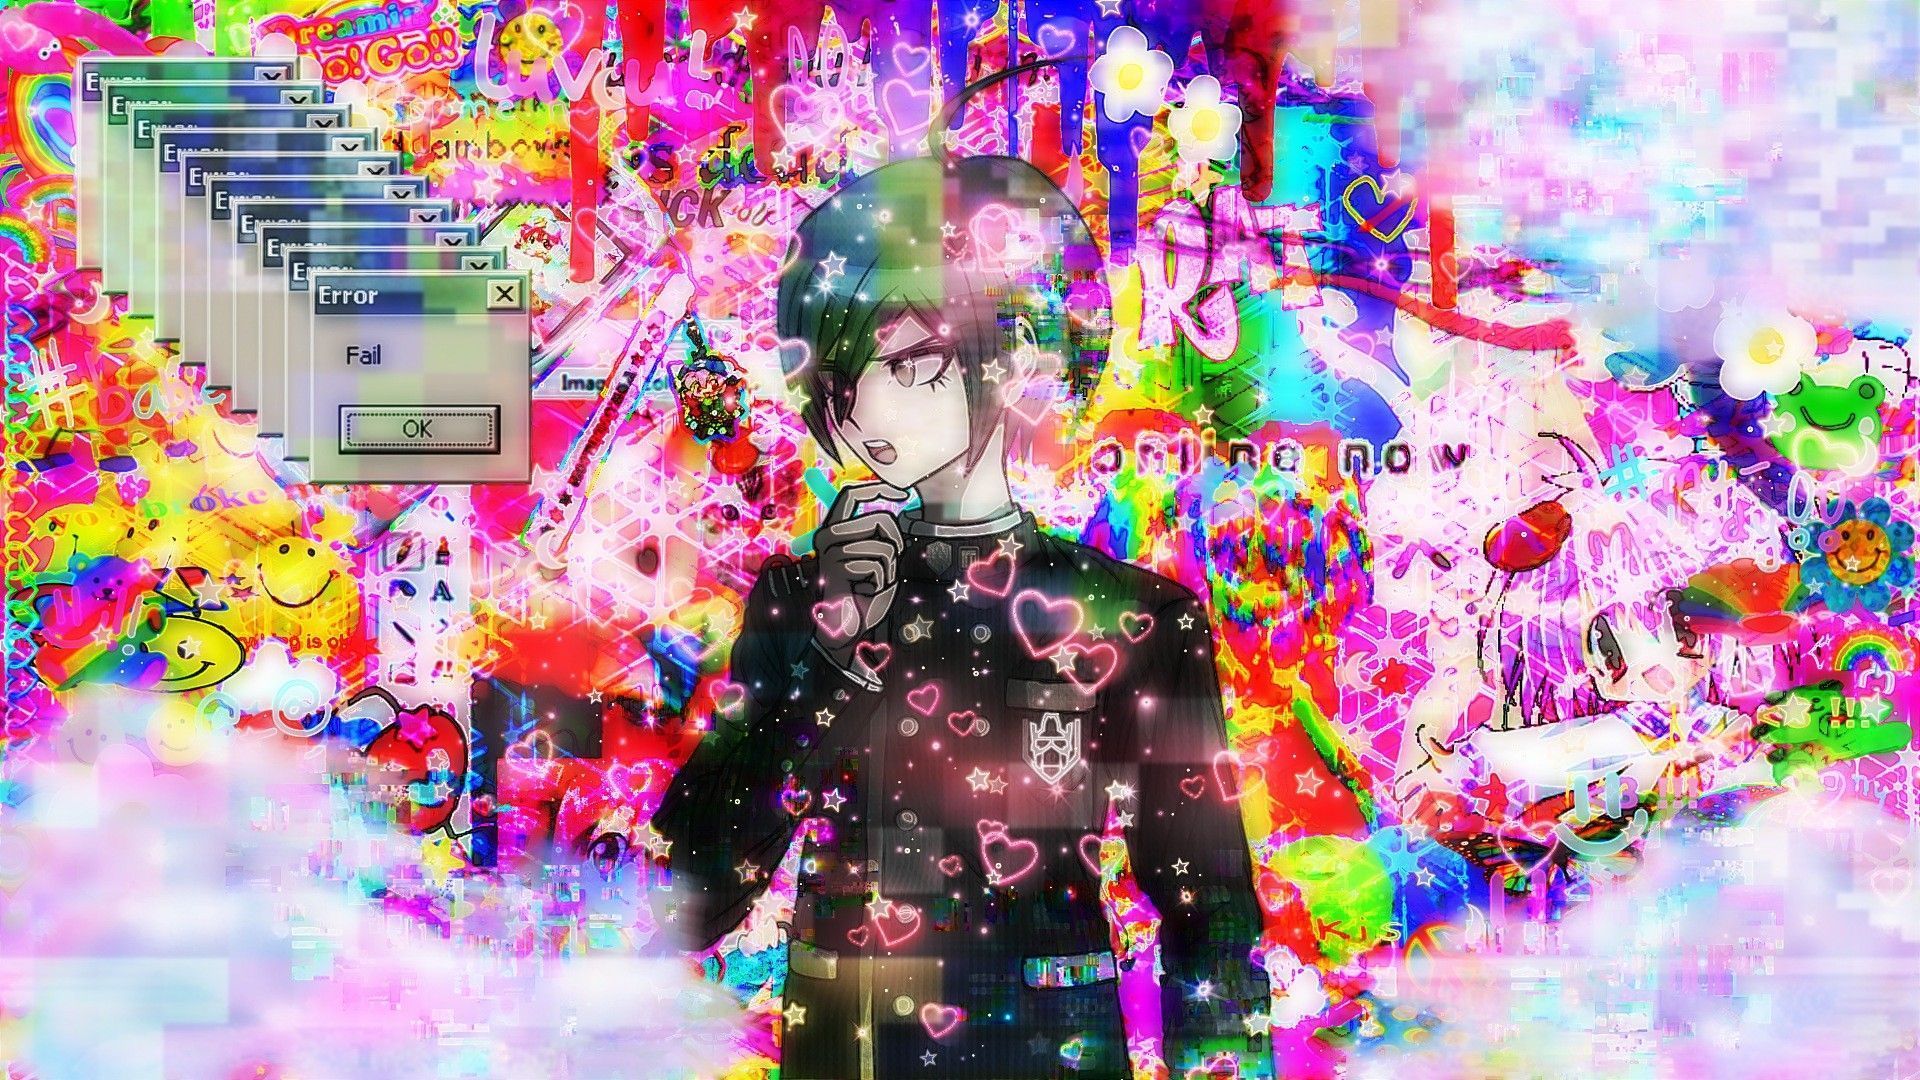 Anime boy with black hair and a black shirt standing in front of a colorful background - Weirdcore, glitchcore